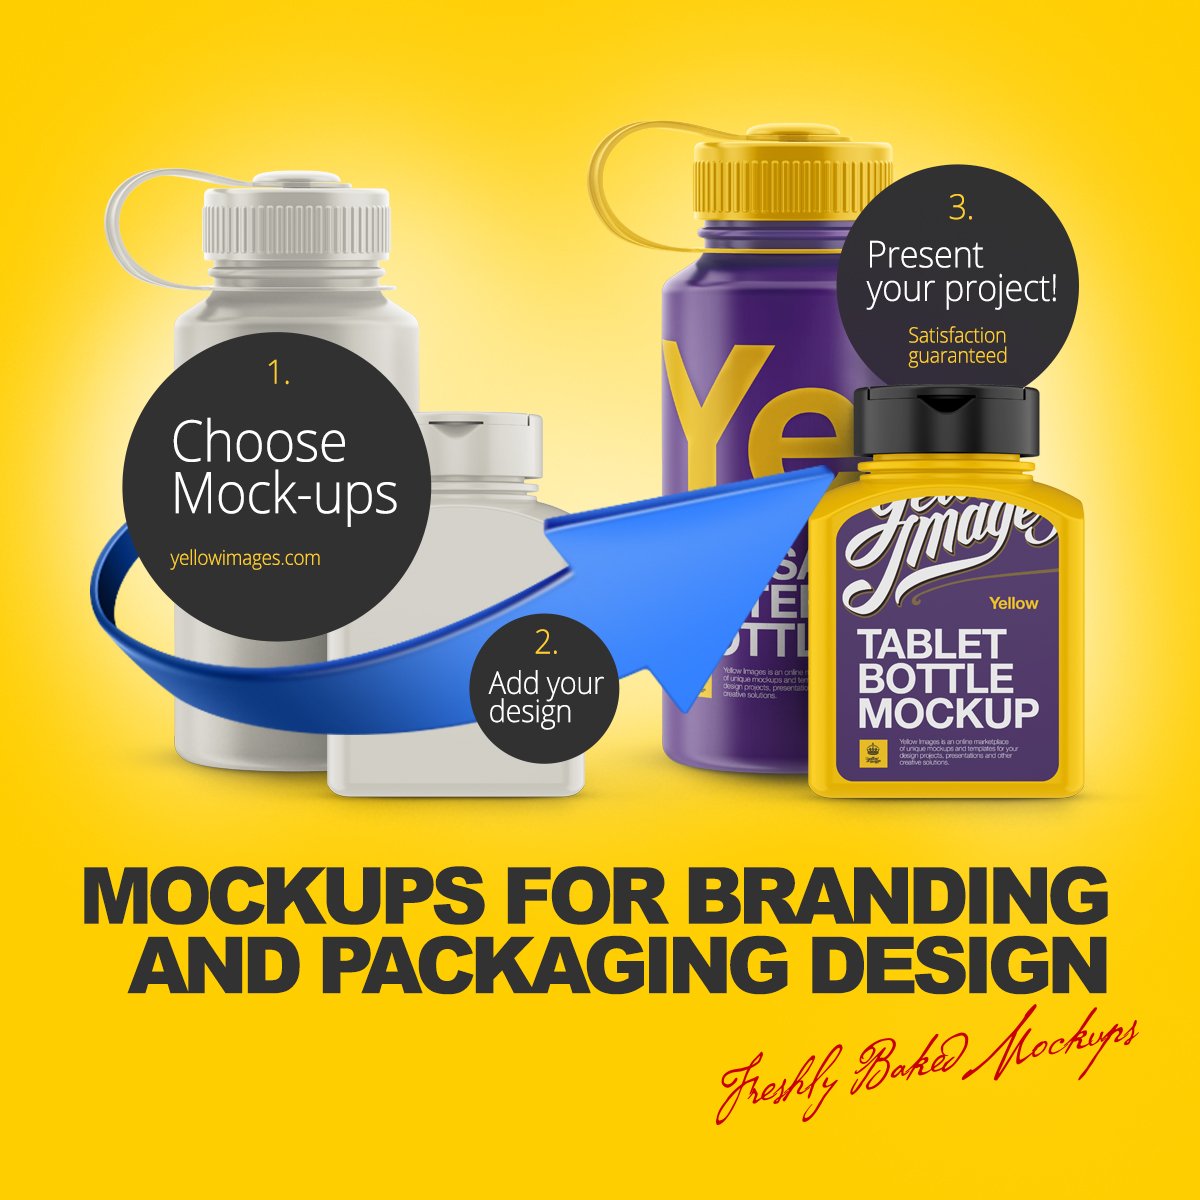 Yellow Images On Twitter Freshly Baked Mockups On Yellow Images Https T Co Fvtpxynwdl Yellowimages Mockups Packaging Branding Psd